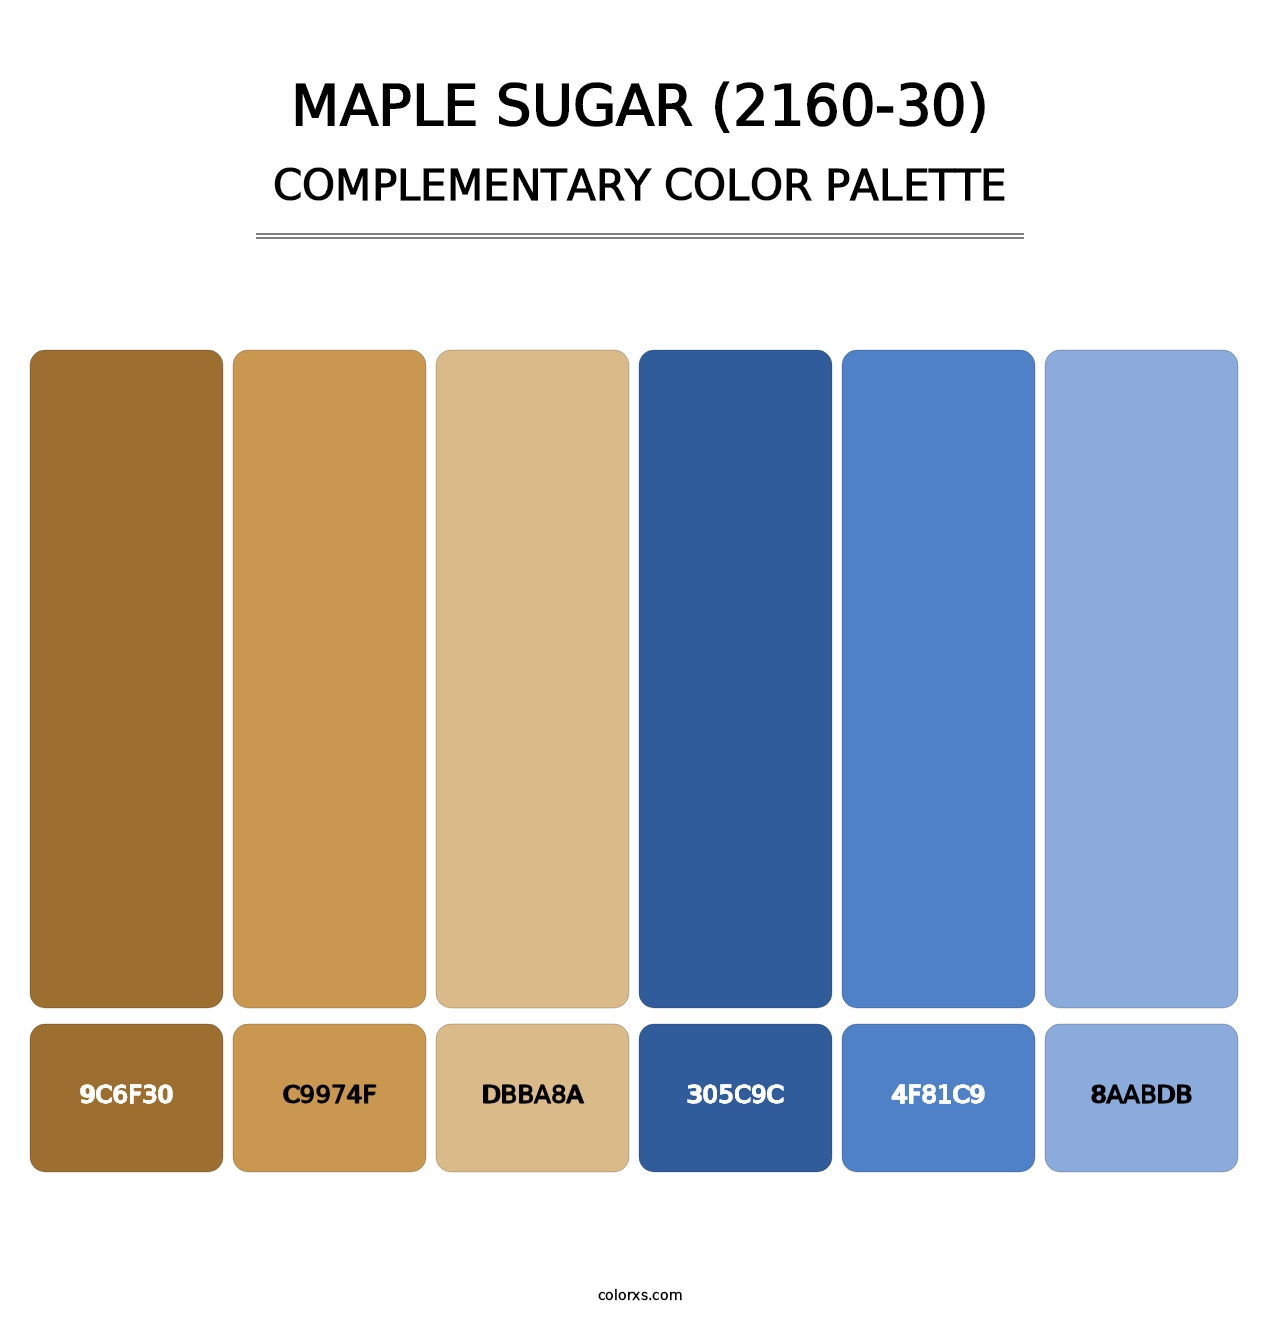 Maple Sugar (2160-30) - Complementary Color Palette